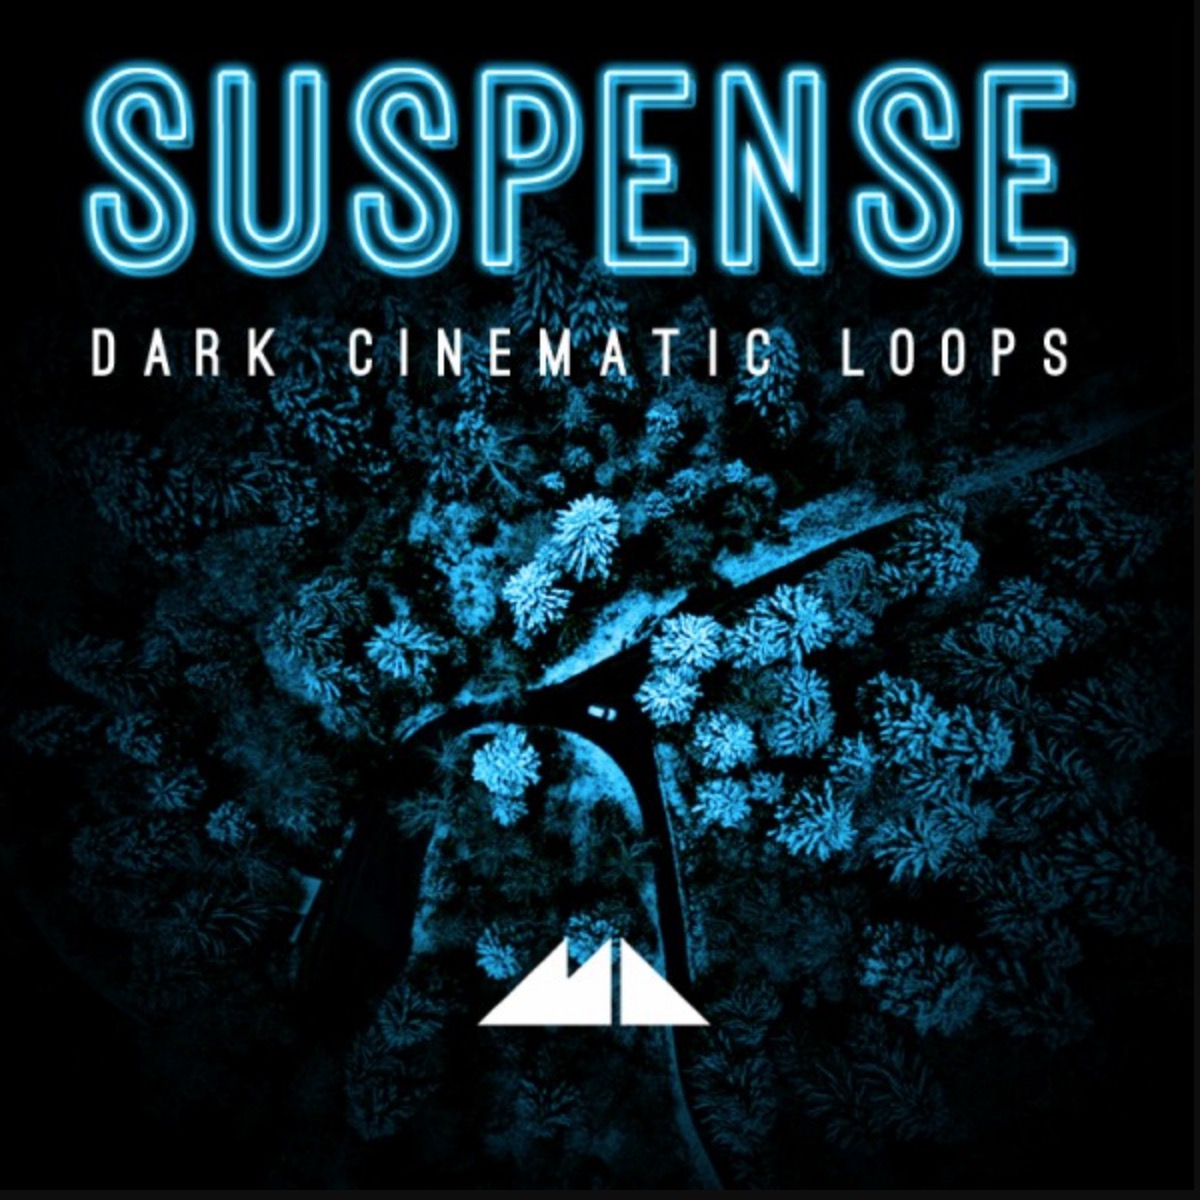 Suspense Dark Cinematic Loops by ModeAudio Review